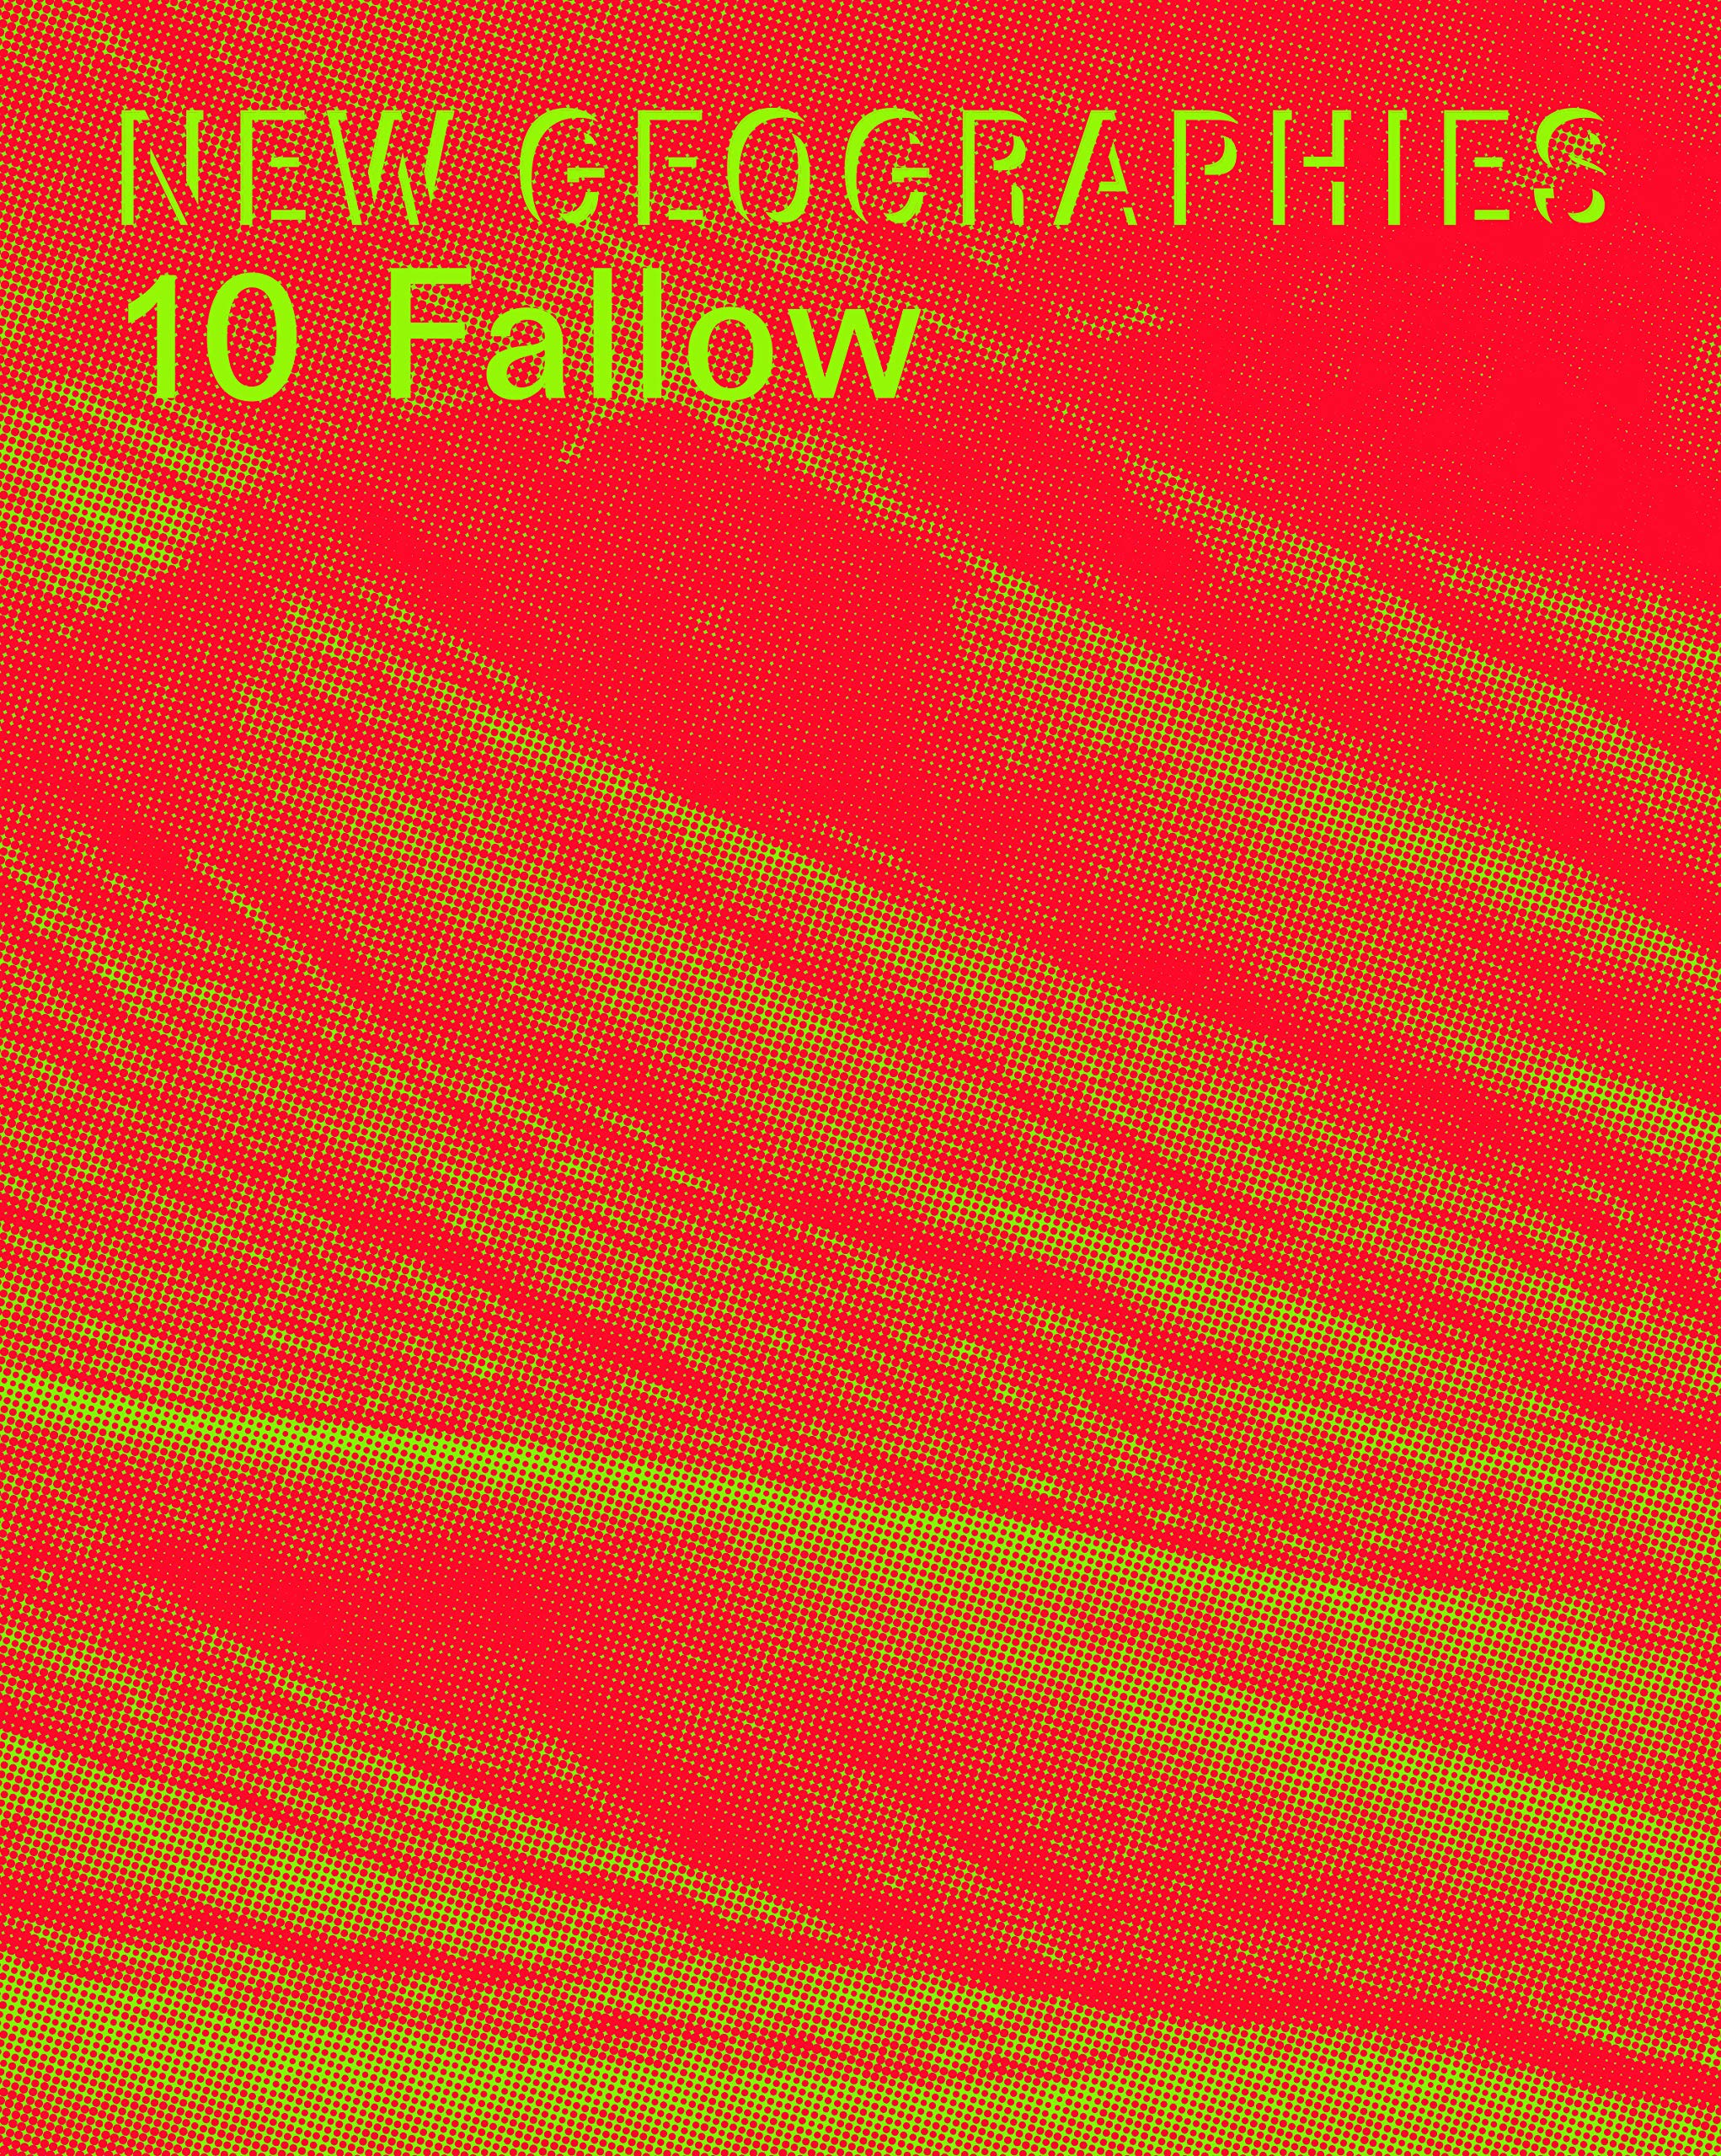 New Geographies 10: Fallow 